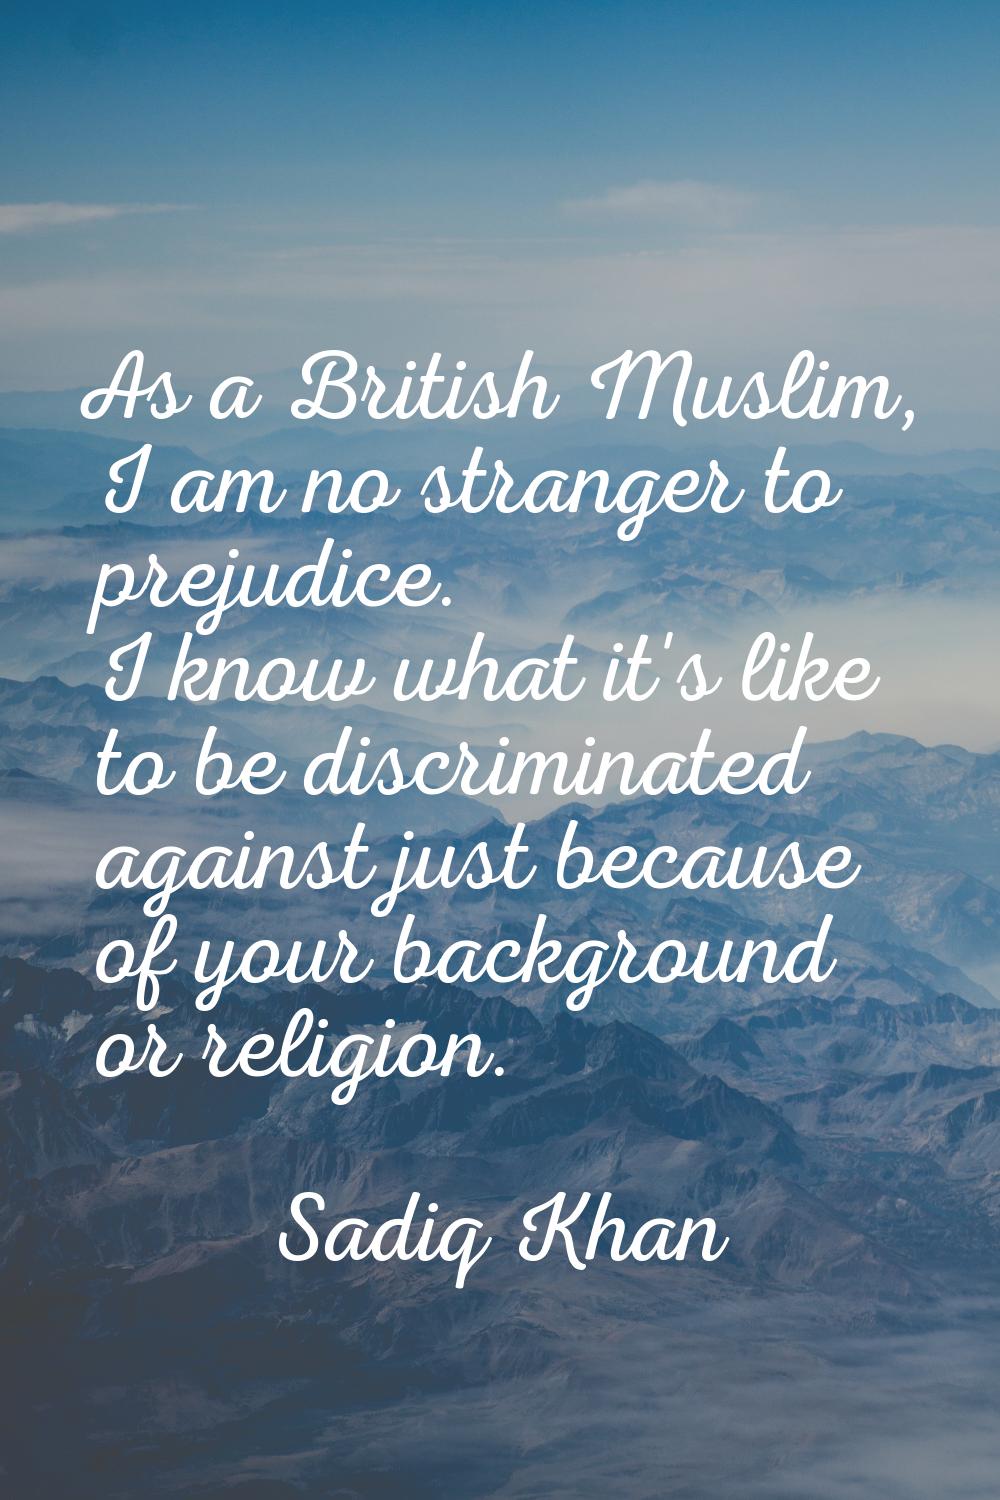 As a British Muslim, I am no stranger to prejudice. I know what it's like to be discriminated again